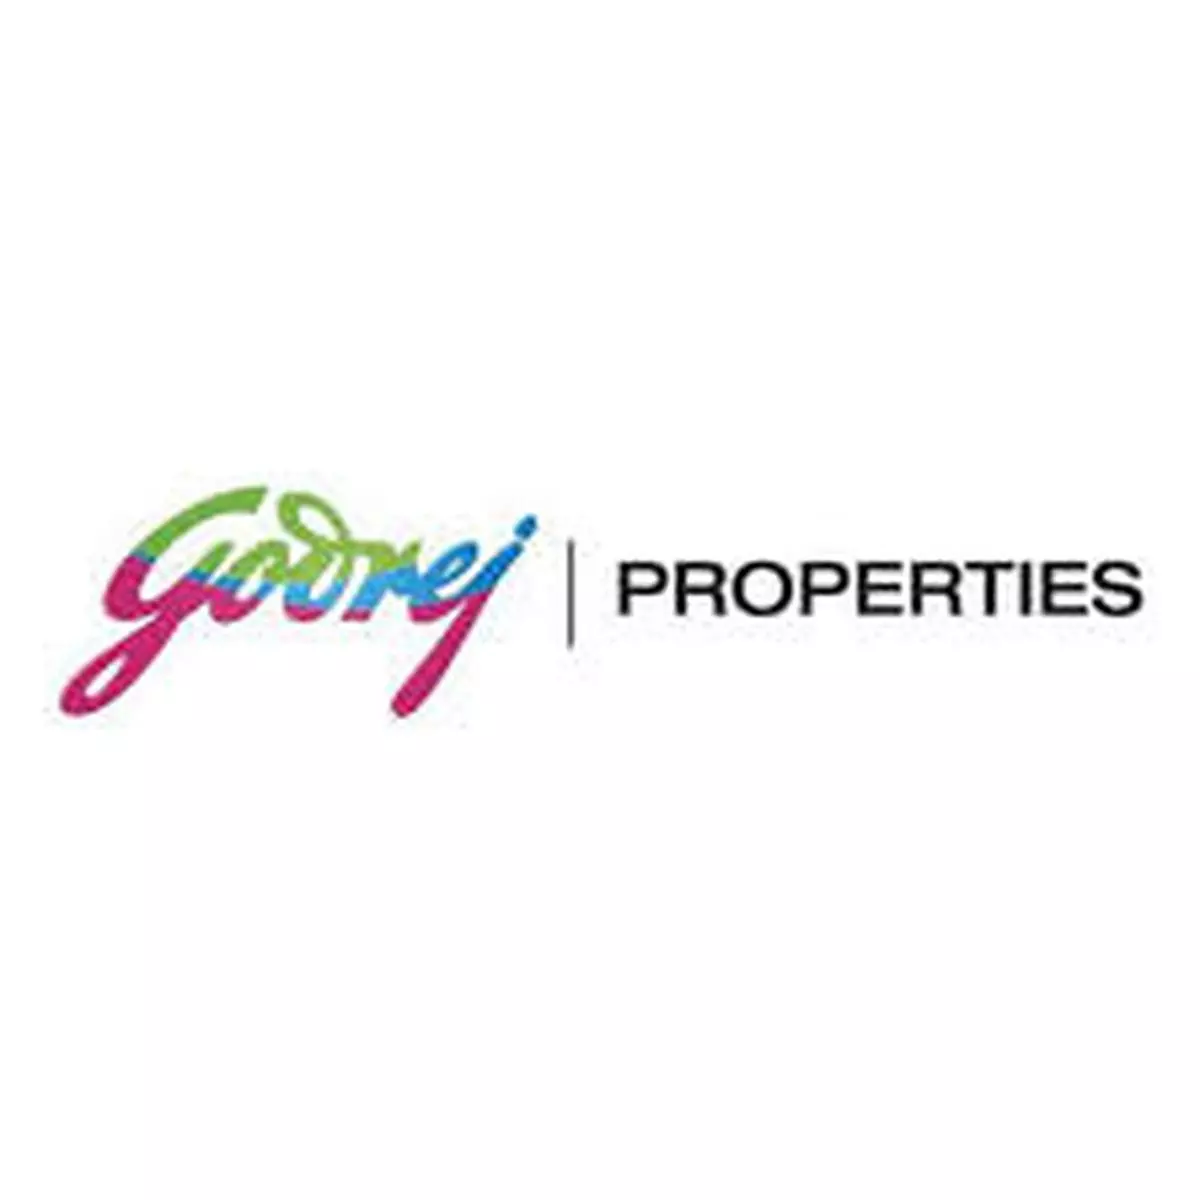 Godrej Properties launched the Phase 1 of its Riverhills township project in September 2019 